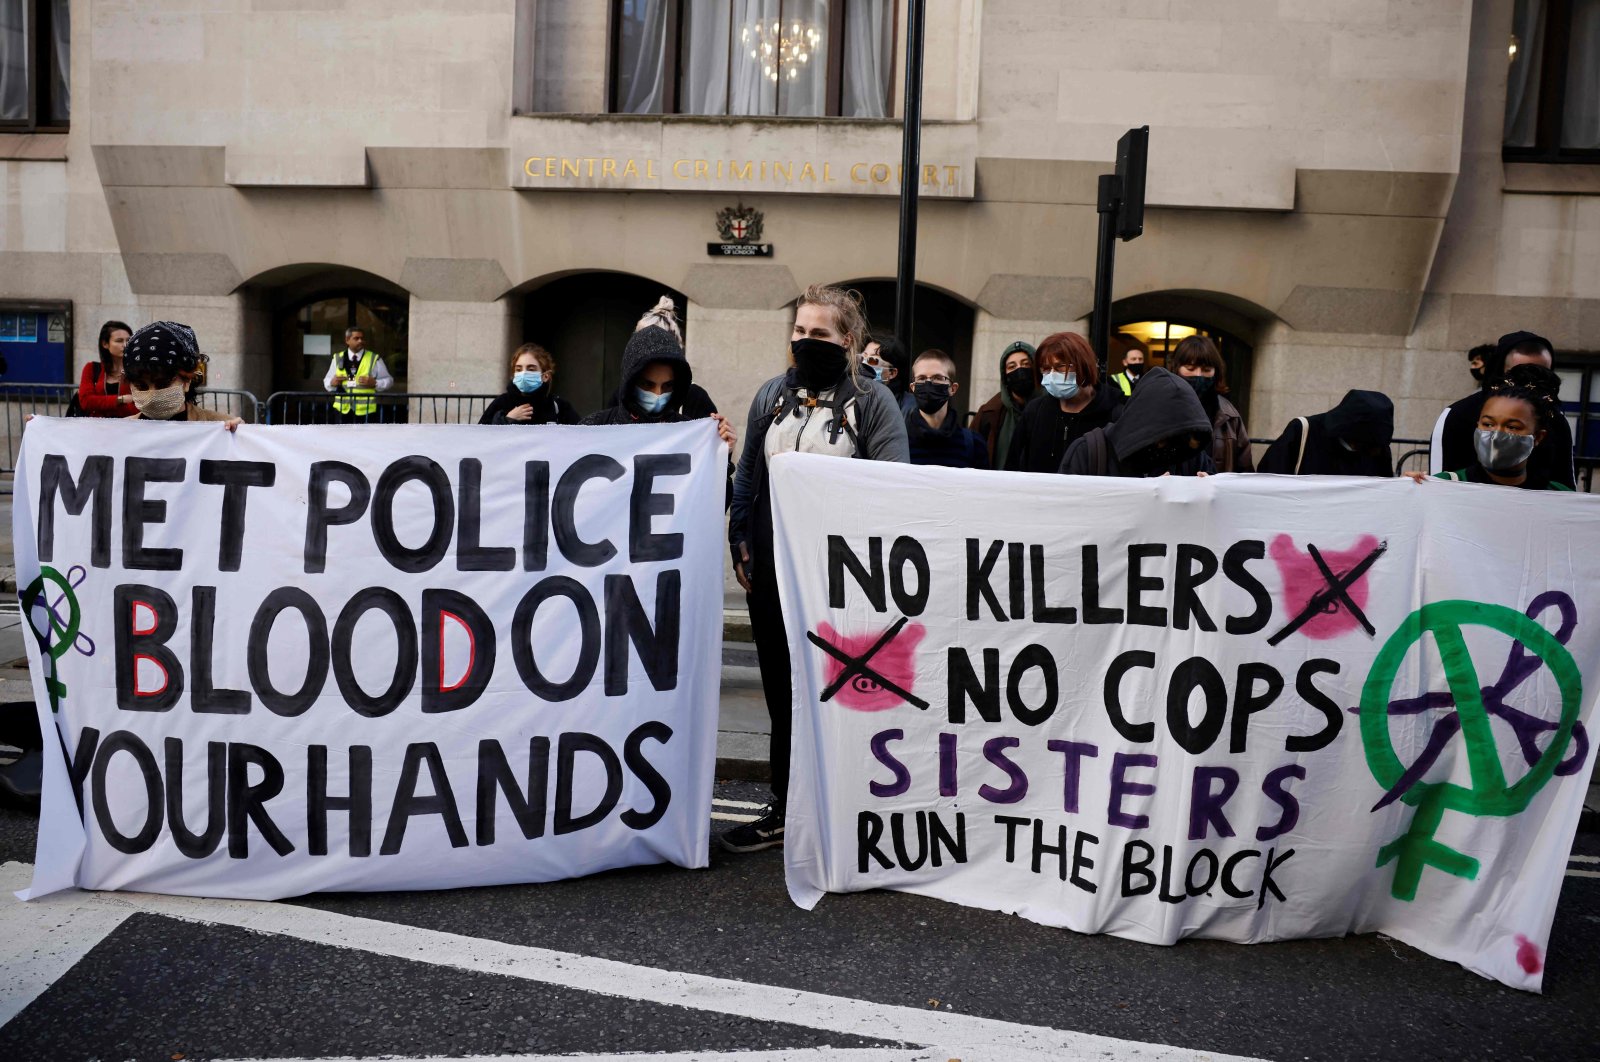 Demonstrators hold banners as they await the sentencing of British police officer Wayne Couzens for the murder of Sarah Everard, outside the Old Bailey court in London on Sept. 29, 2021. (AFP Photo)